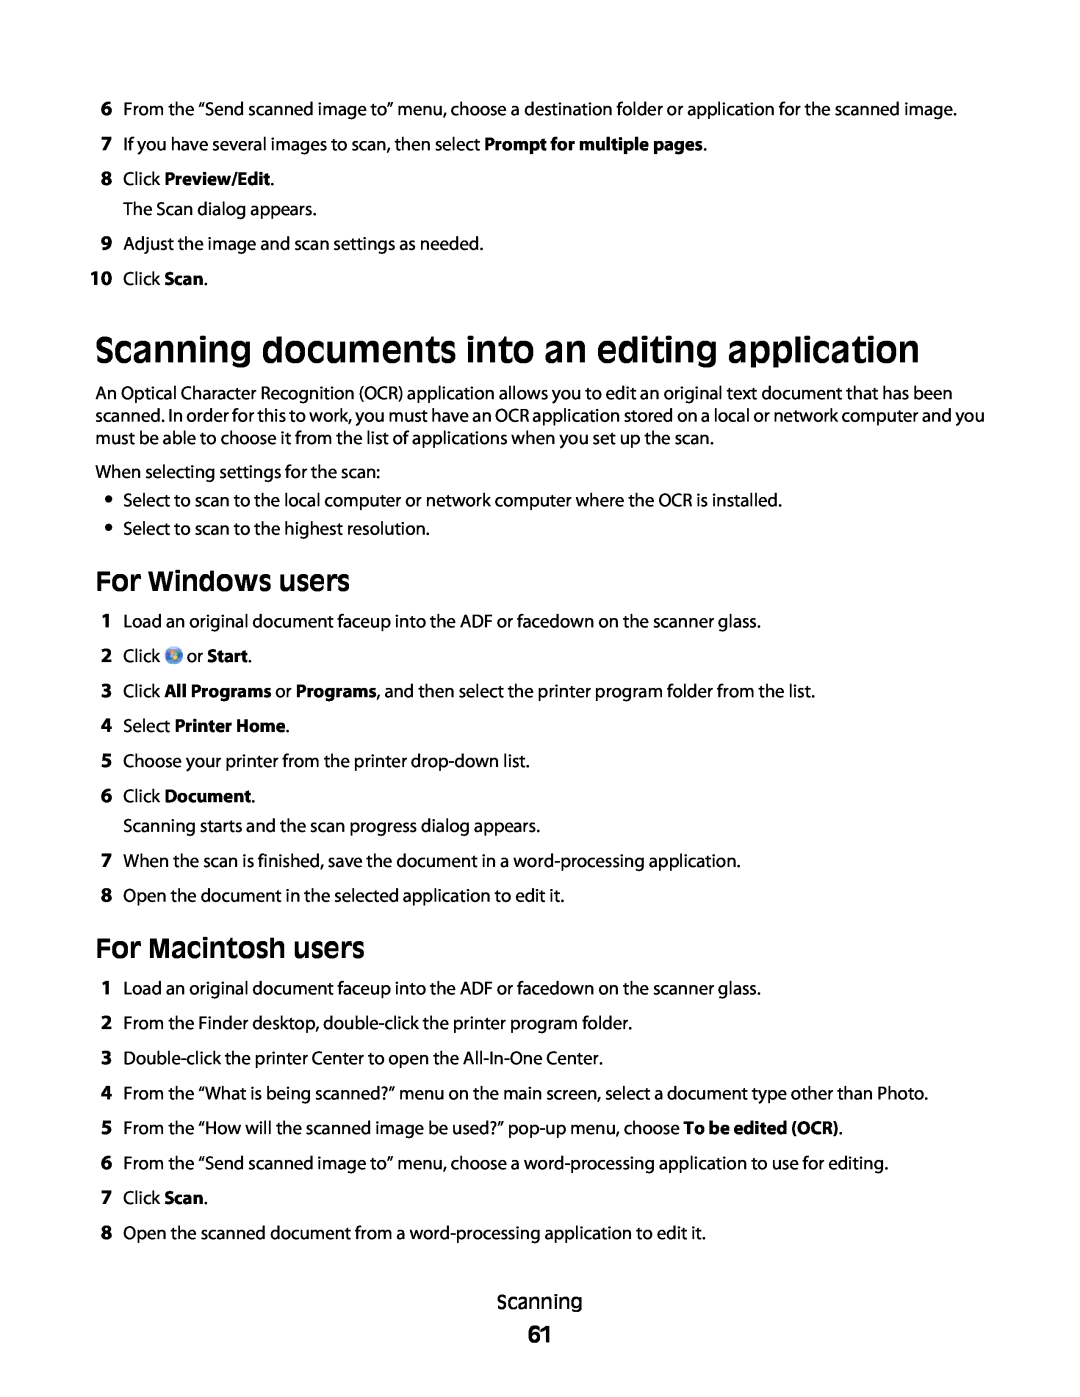 Lexmark 30E, S500 Scanning documents into an editing application, Click Preview/Edit, Click Document, For Windows users 